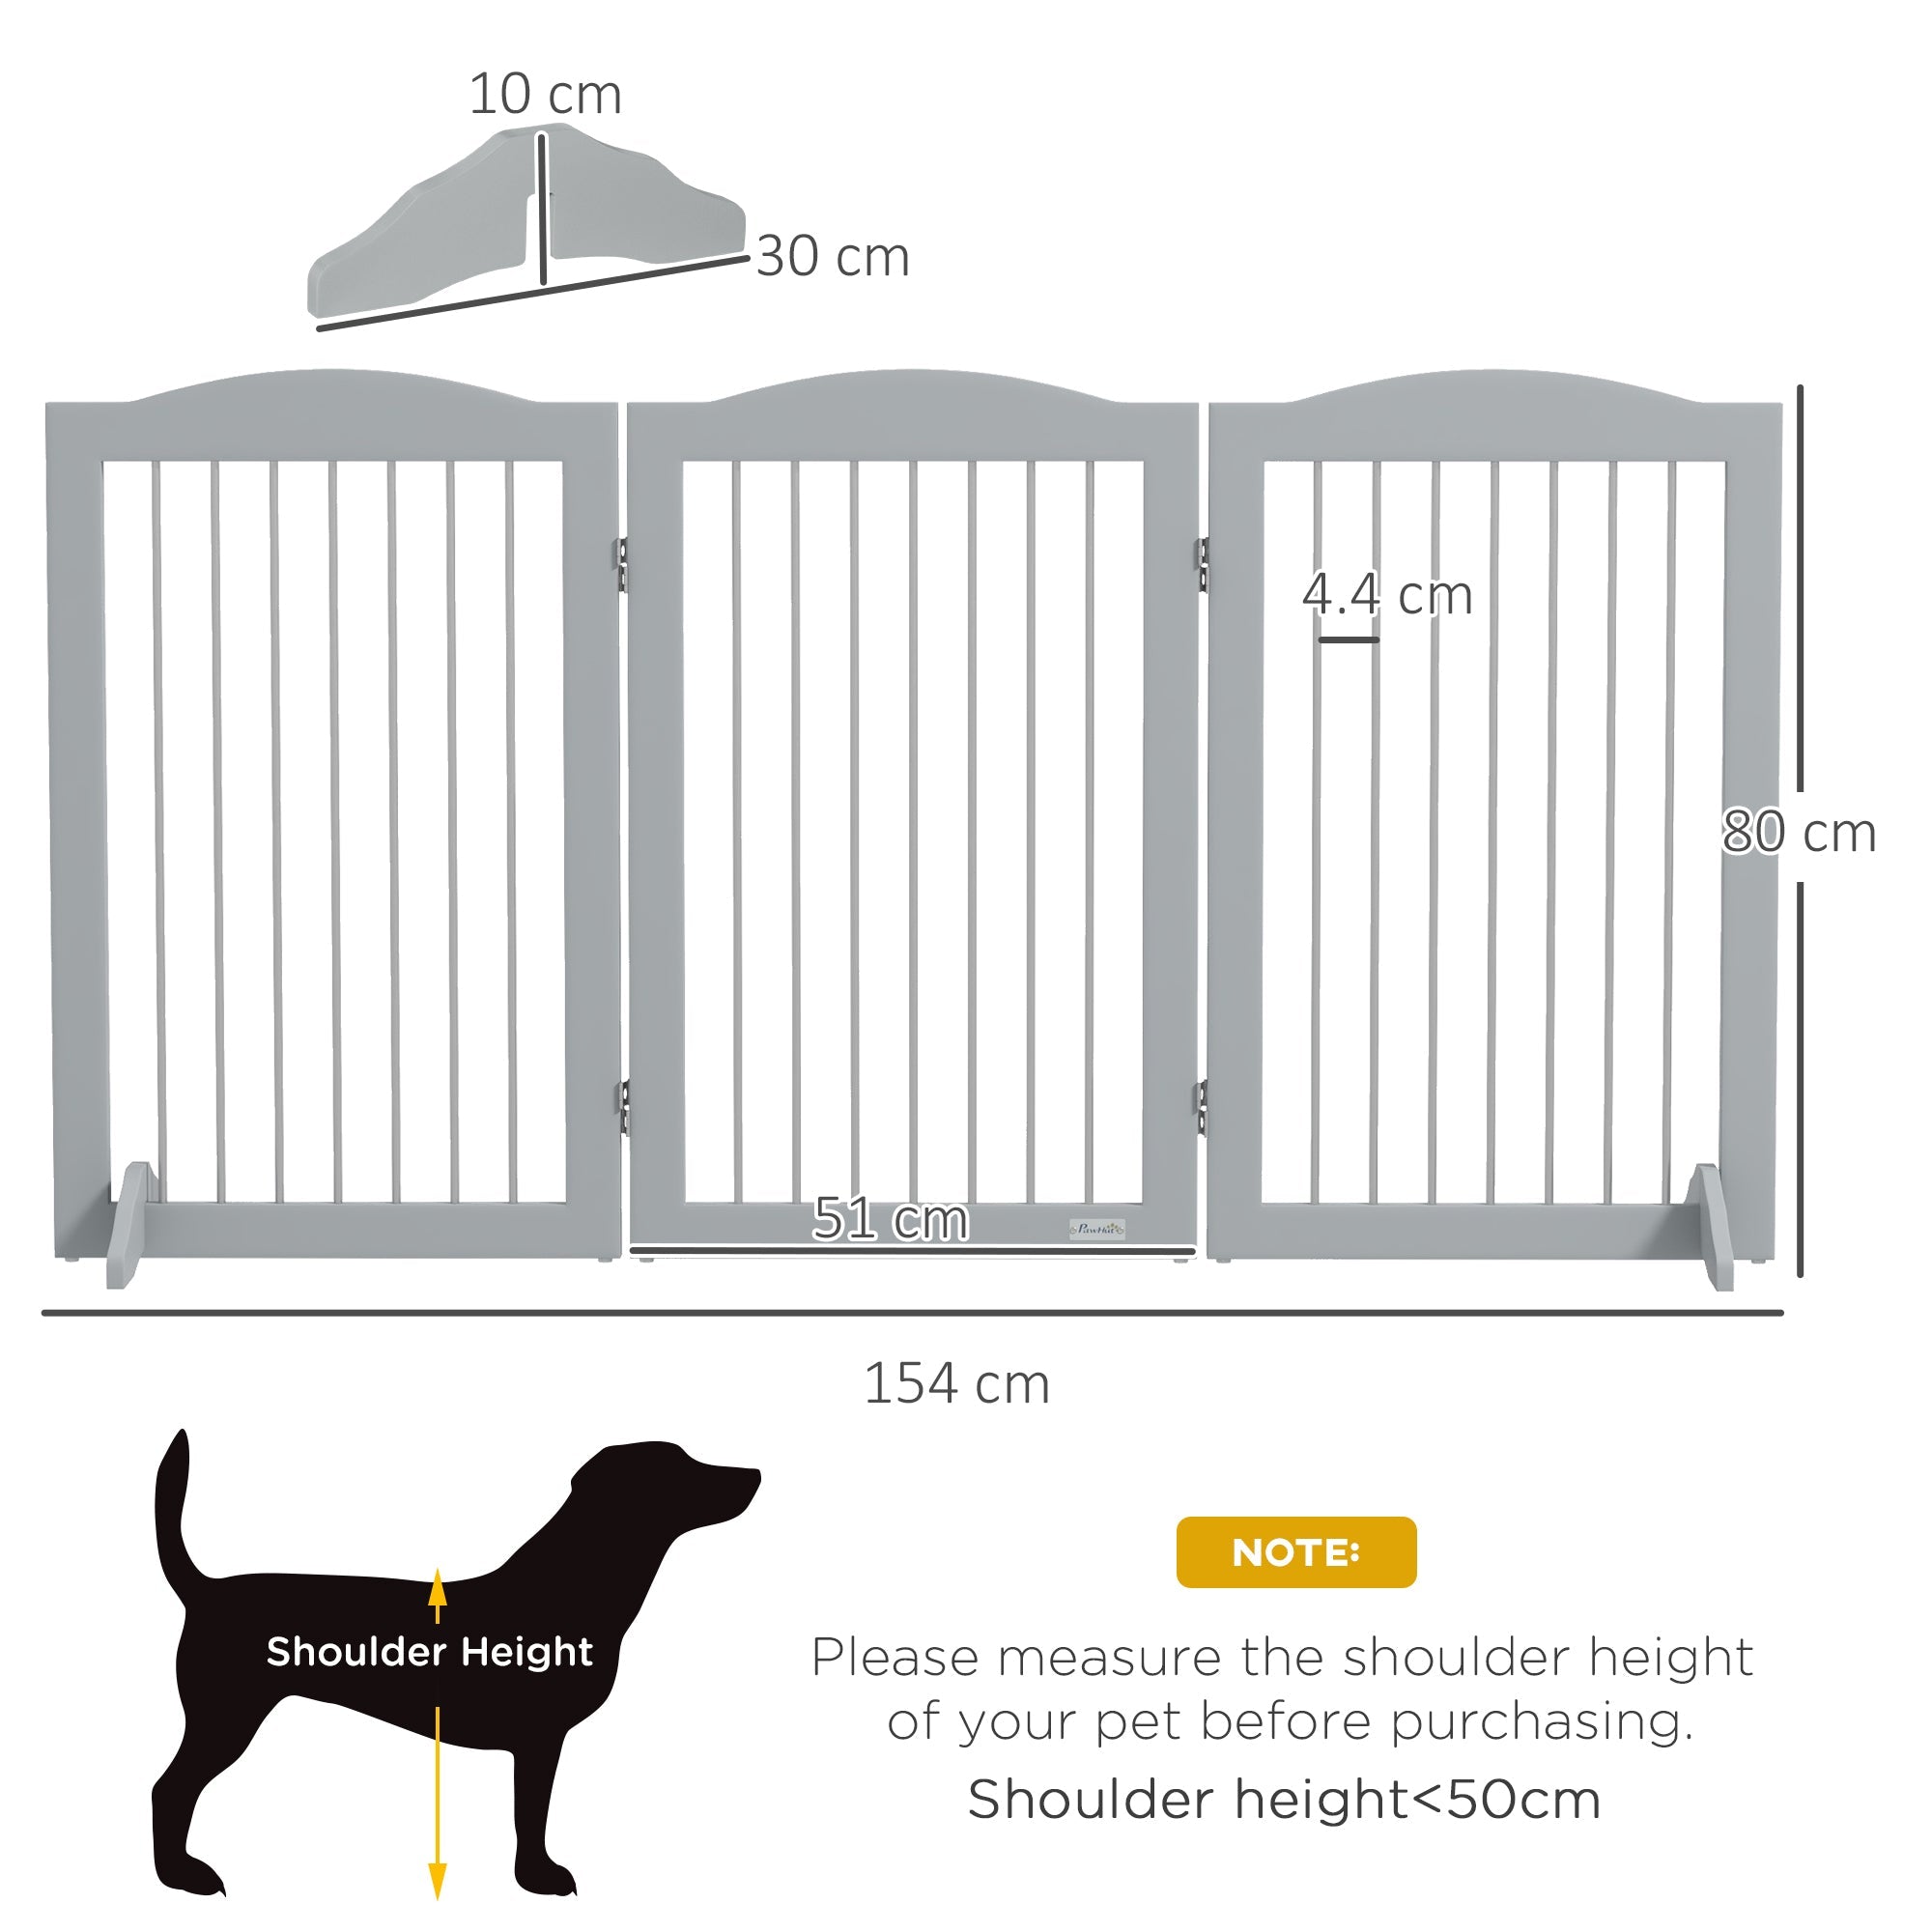 Foldable Dog Gate, Freestanding Pet Gate, with Two Support Feet, for Staircases, Hallways, Doorways - Grey-2